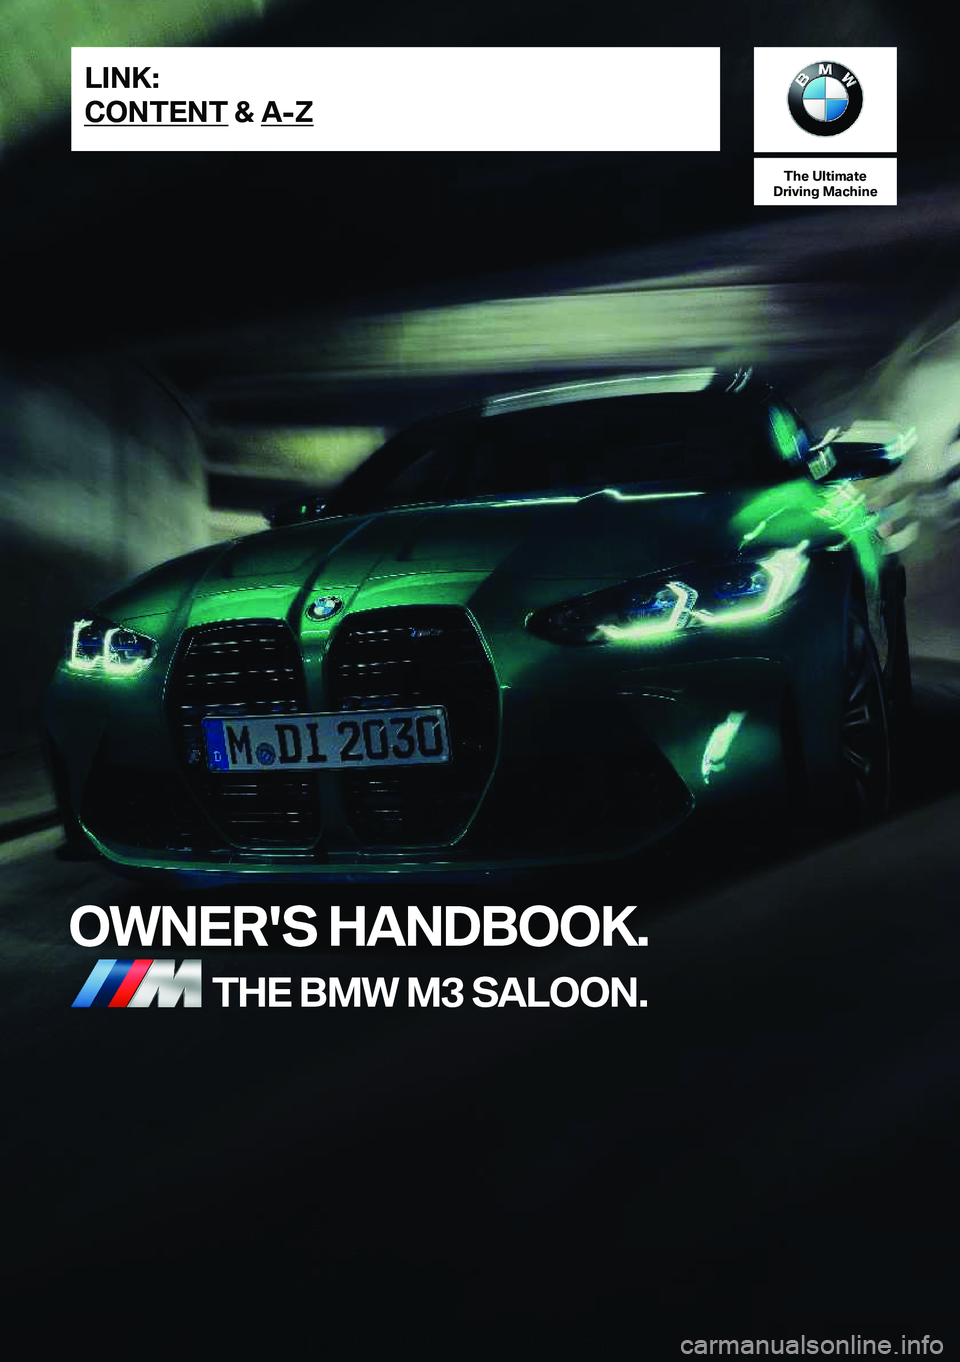 BMW M3 2021  Owners Manual �T�h�e��U�l�t�i�m�a�t�e
�D�r�i�v�i�n�g��M�a�c�h�i�n�e
�O�W�N�E�R�'�S��H�A�N�D�B�O�O�K�.�T�H�E��B�M�W��M�3��S�A�L�O�O�N�.�L�I�N�K�:
�C�O�N�T�E�N�T��&��A�-�Z�O�n�l�i�n�e��E�d�i�t�i�o�n��f�